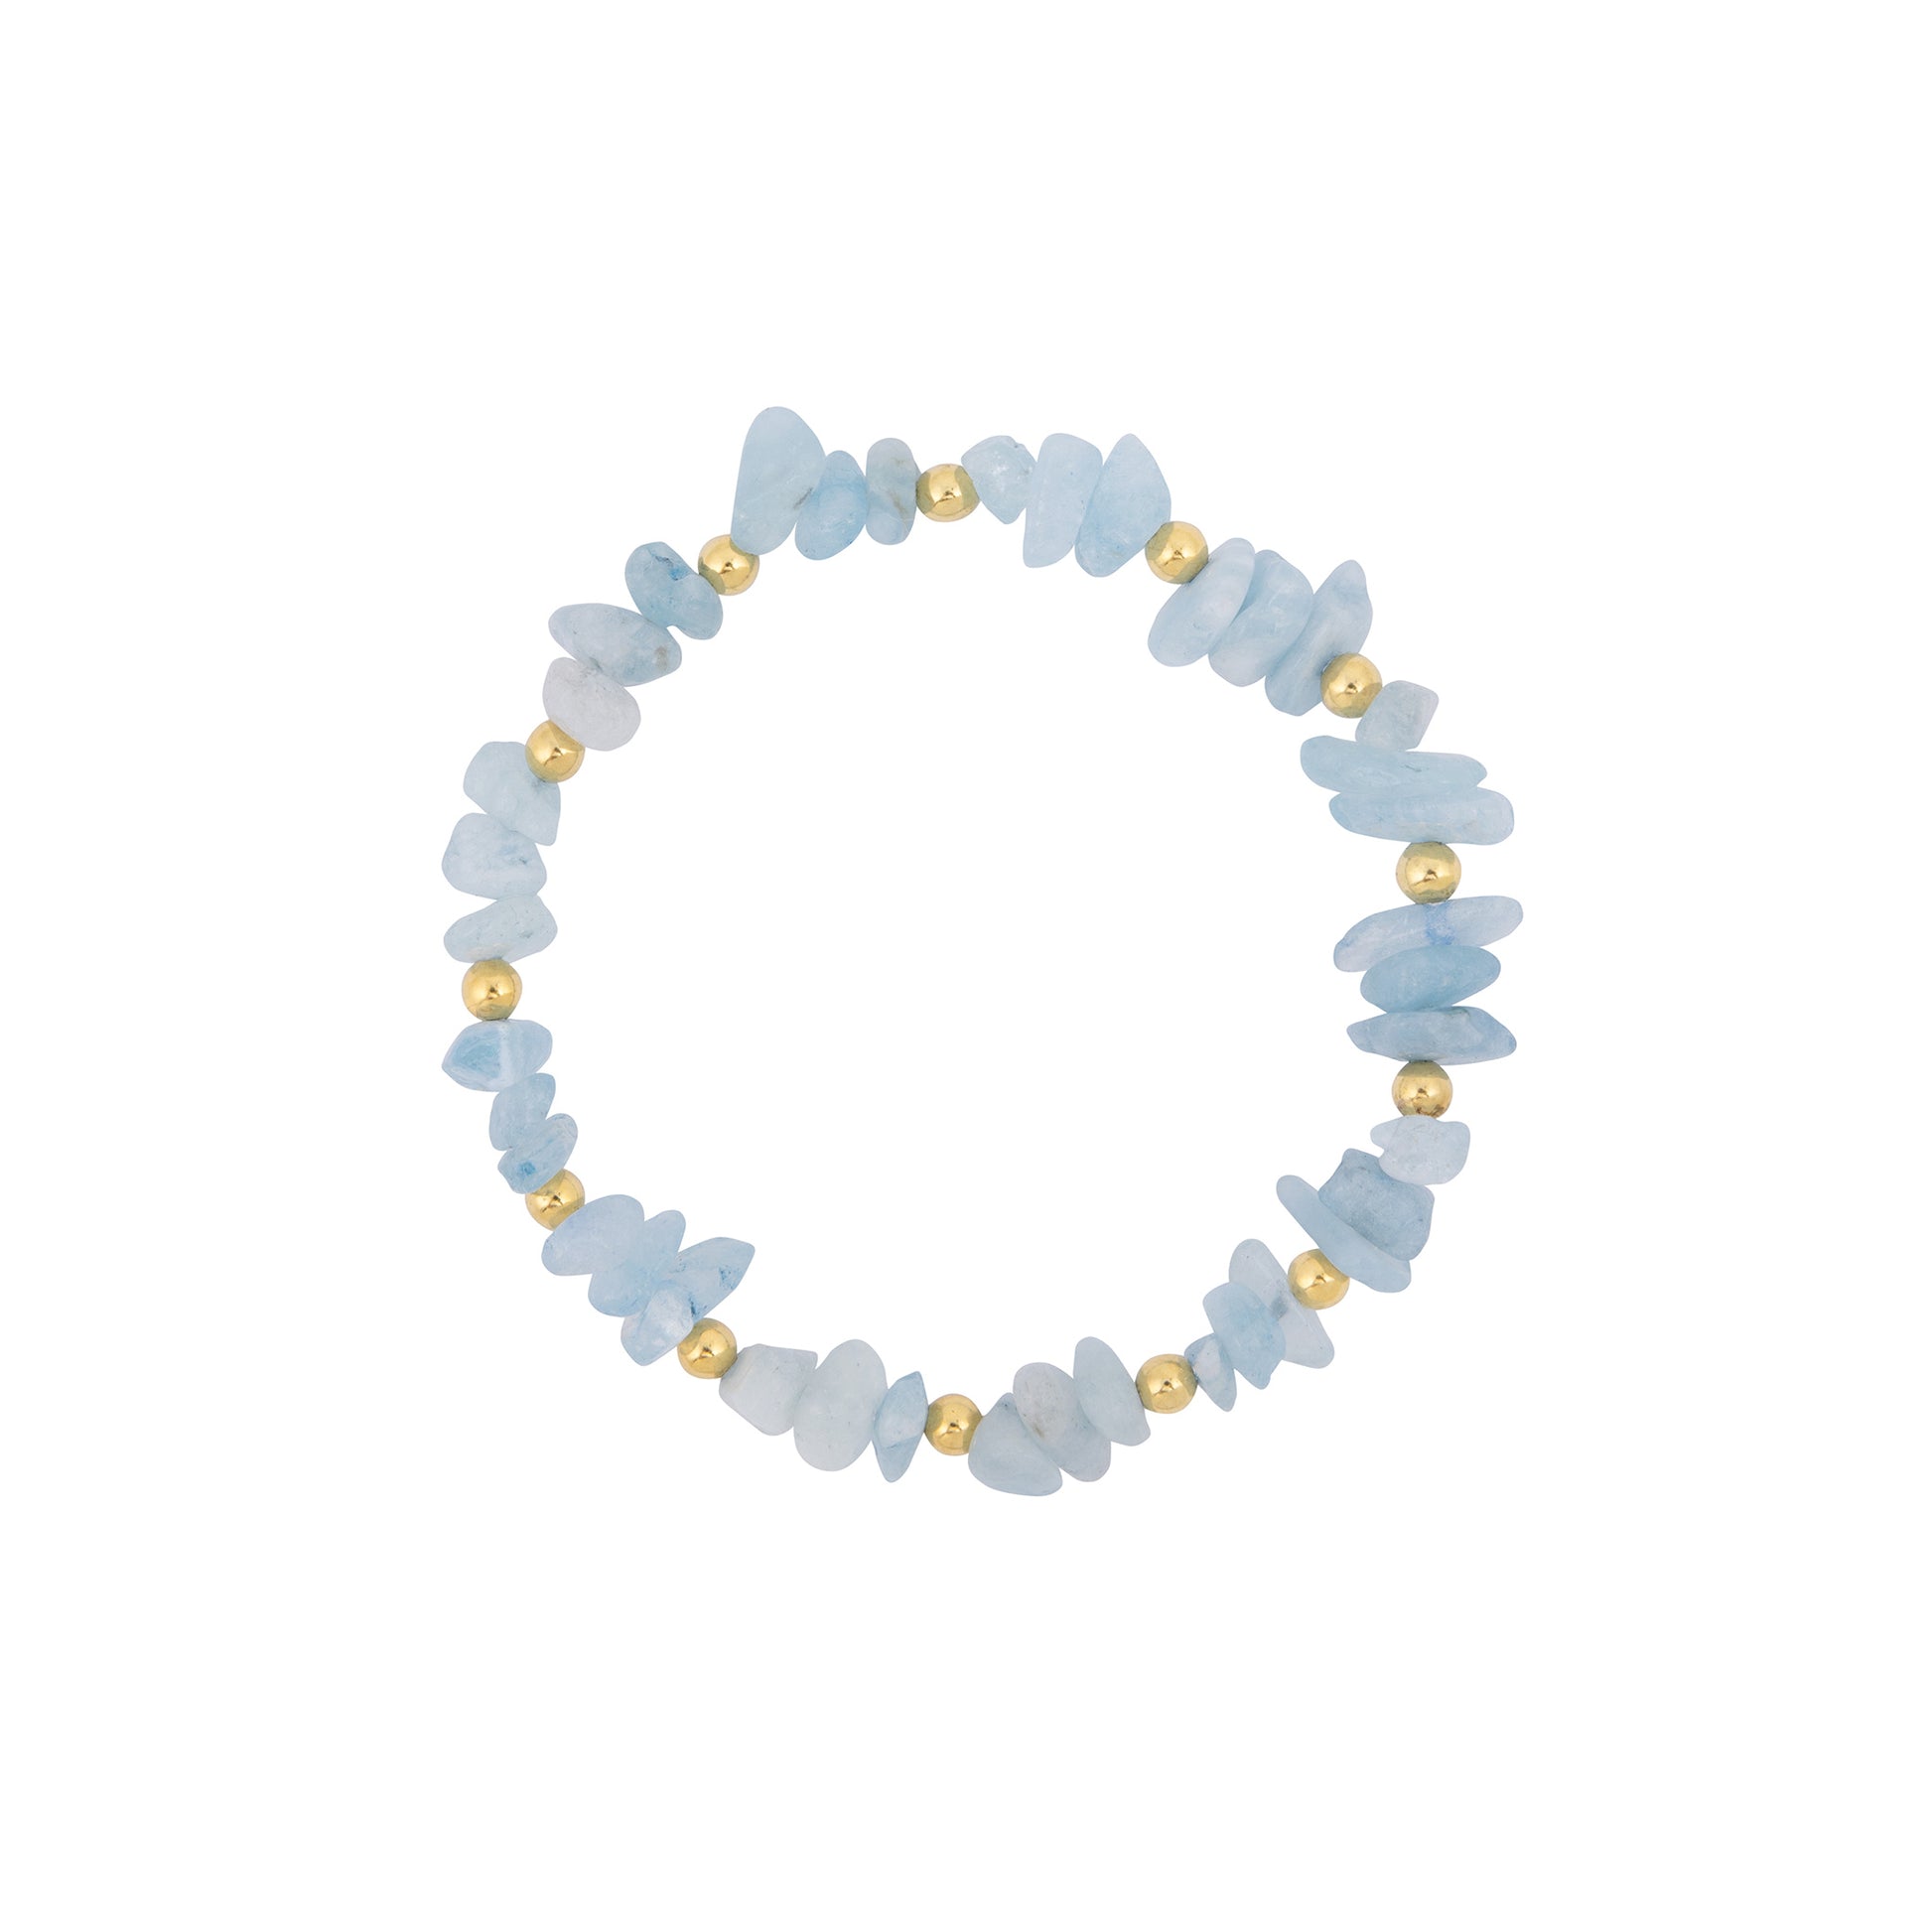 A handcrafted *Aquamarine Stone Bracelet* by *Made Here with Love*, featuring light blue, irregularly shaped stones, interspersed with small, round gold beads. The bracelet is arranged in a circular shape, showcasing a mix of natural and polished textures—perfect as a March birthday gift.